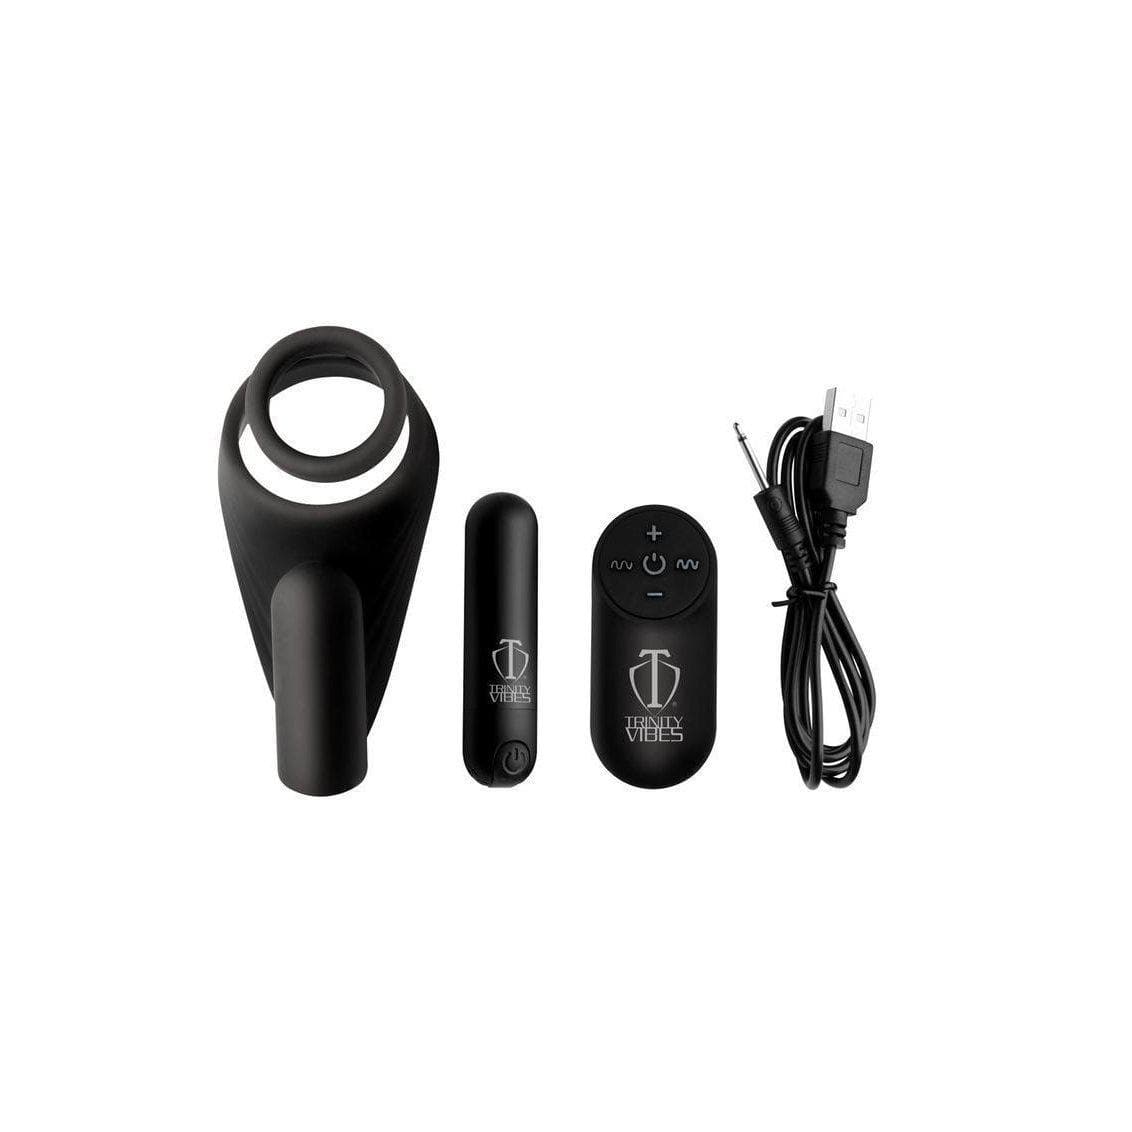 Trinity 4 Men Silicone Rechargeable Penis Ring & Vibrating Taint Stimulator With Remote Control - Romantic Blessings